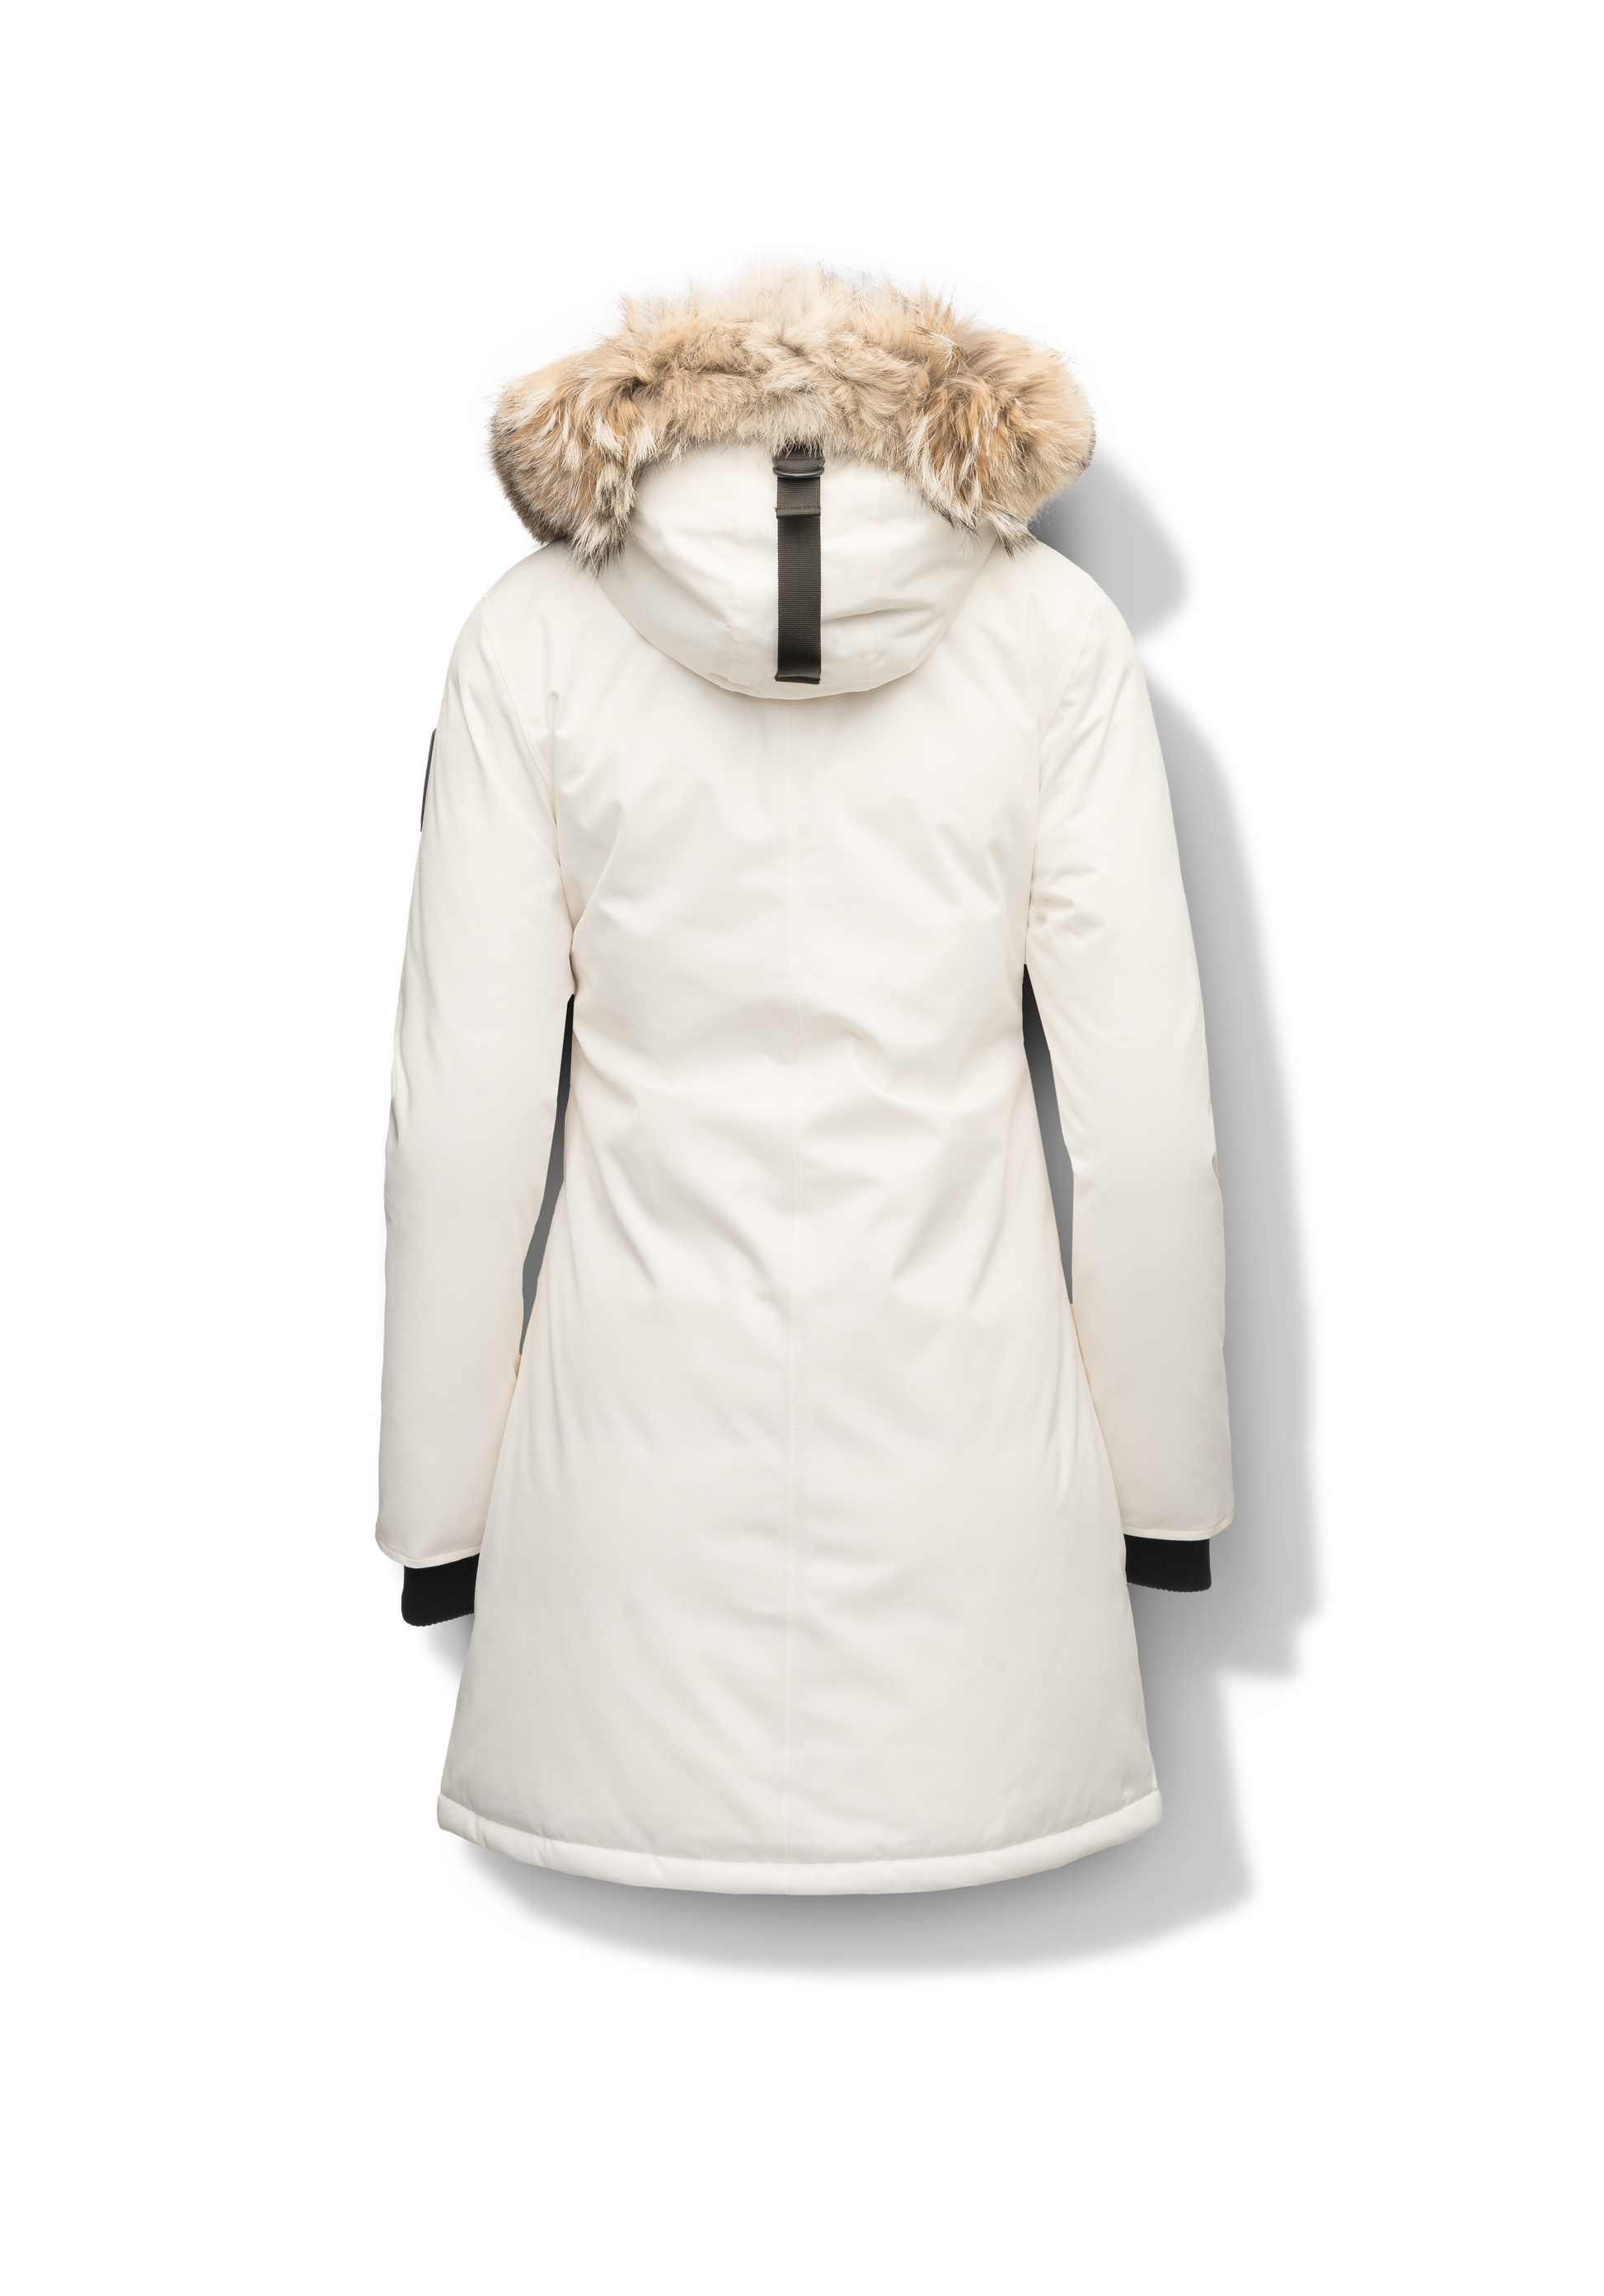 Best selling women's down filled knee length parka with removable down filled hood in Chalk